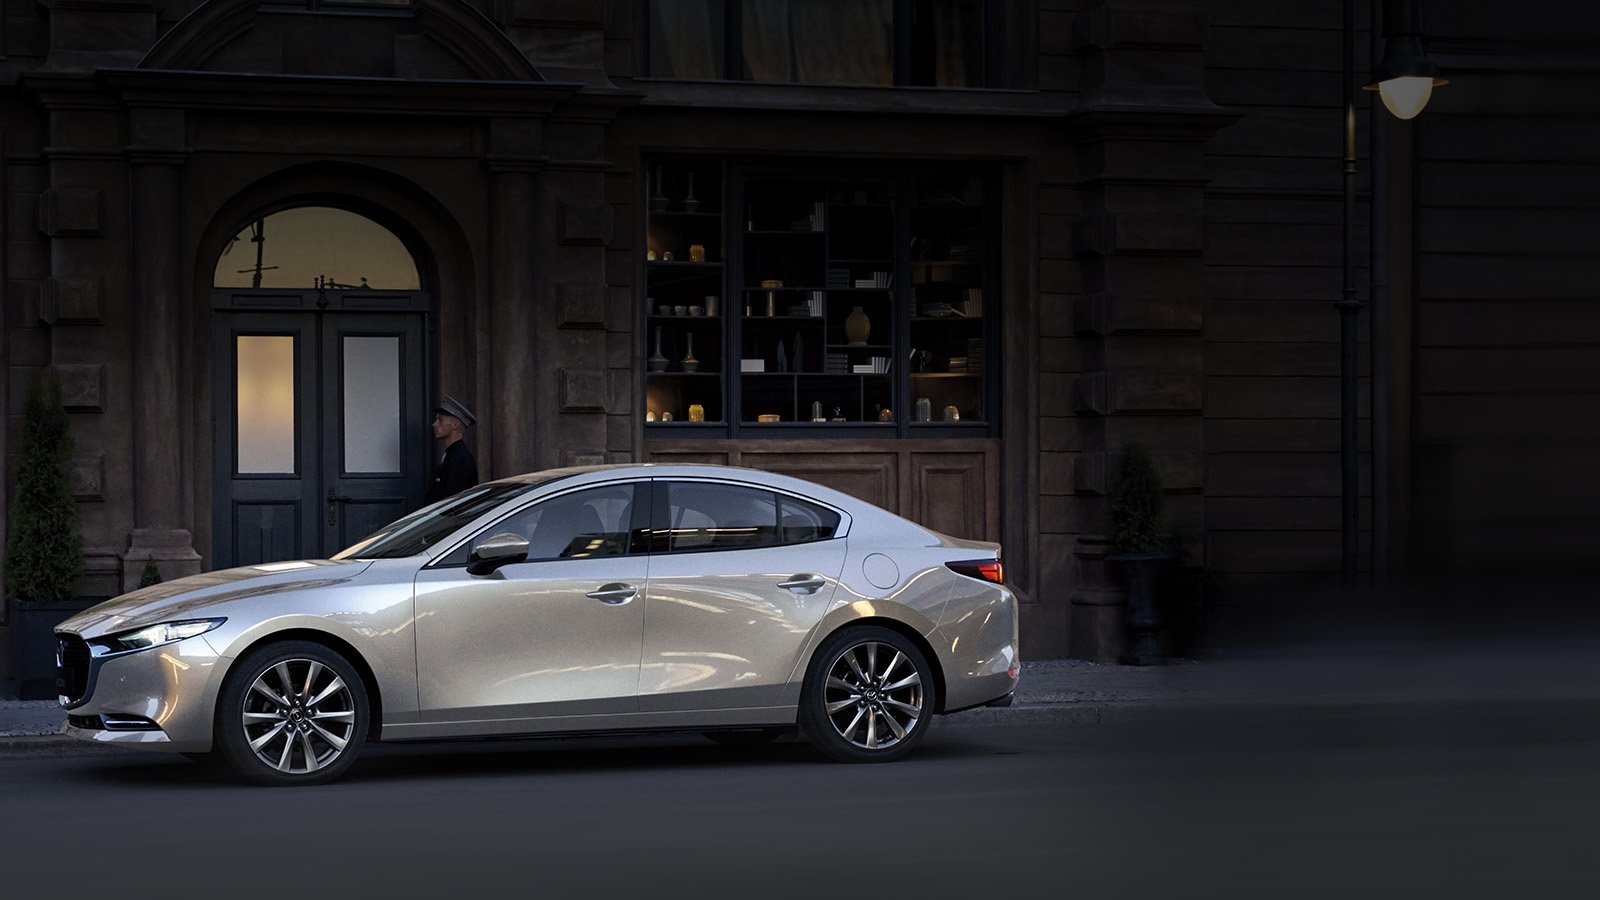 A platinum Mazda3 parked on the street.